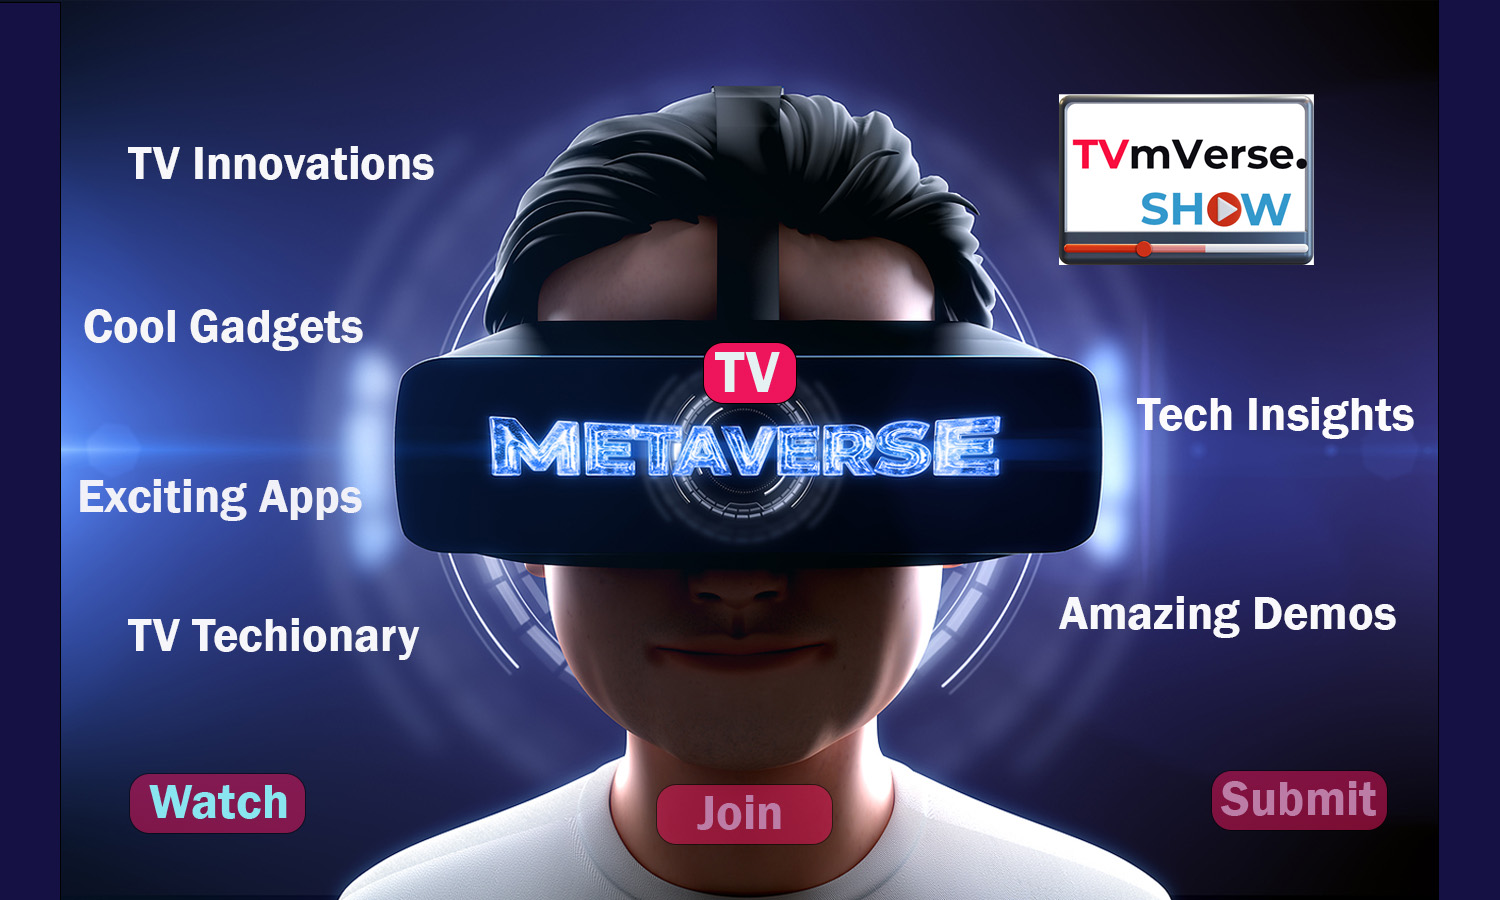 TV Metaverse Show discovers, explains and shares new media gadgets, innovations and apps